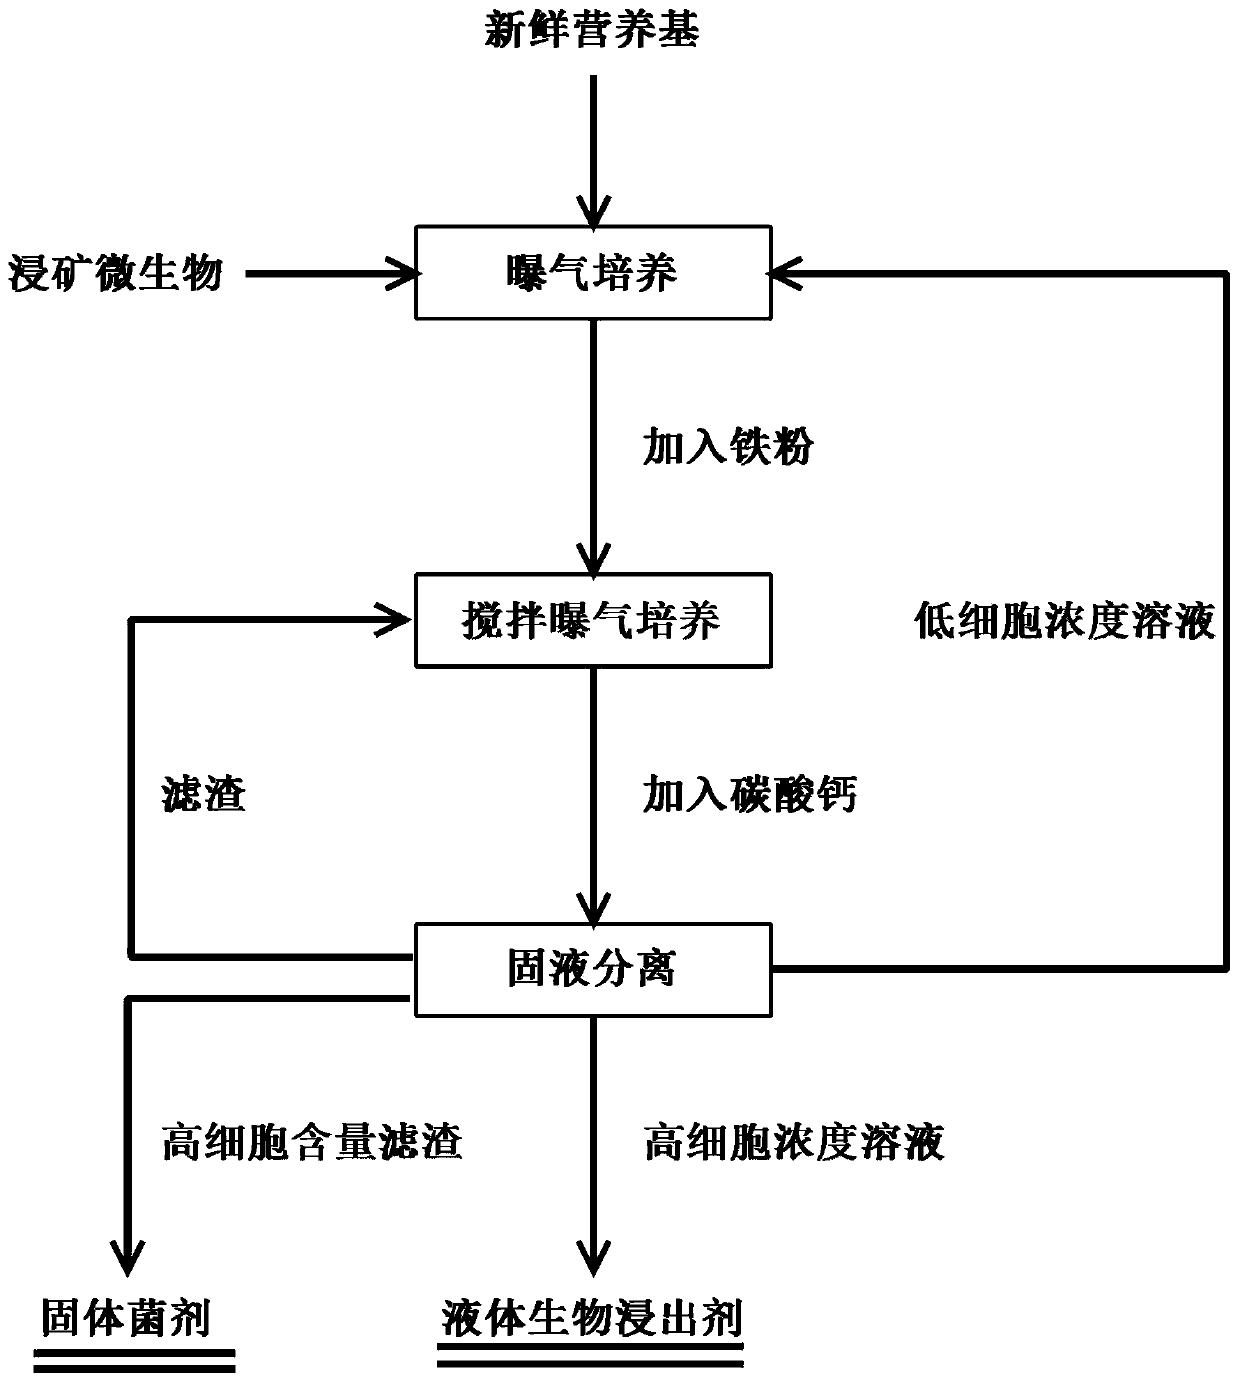 A kind of culture method of iron oxidation leaching microorganism